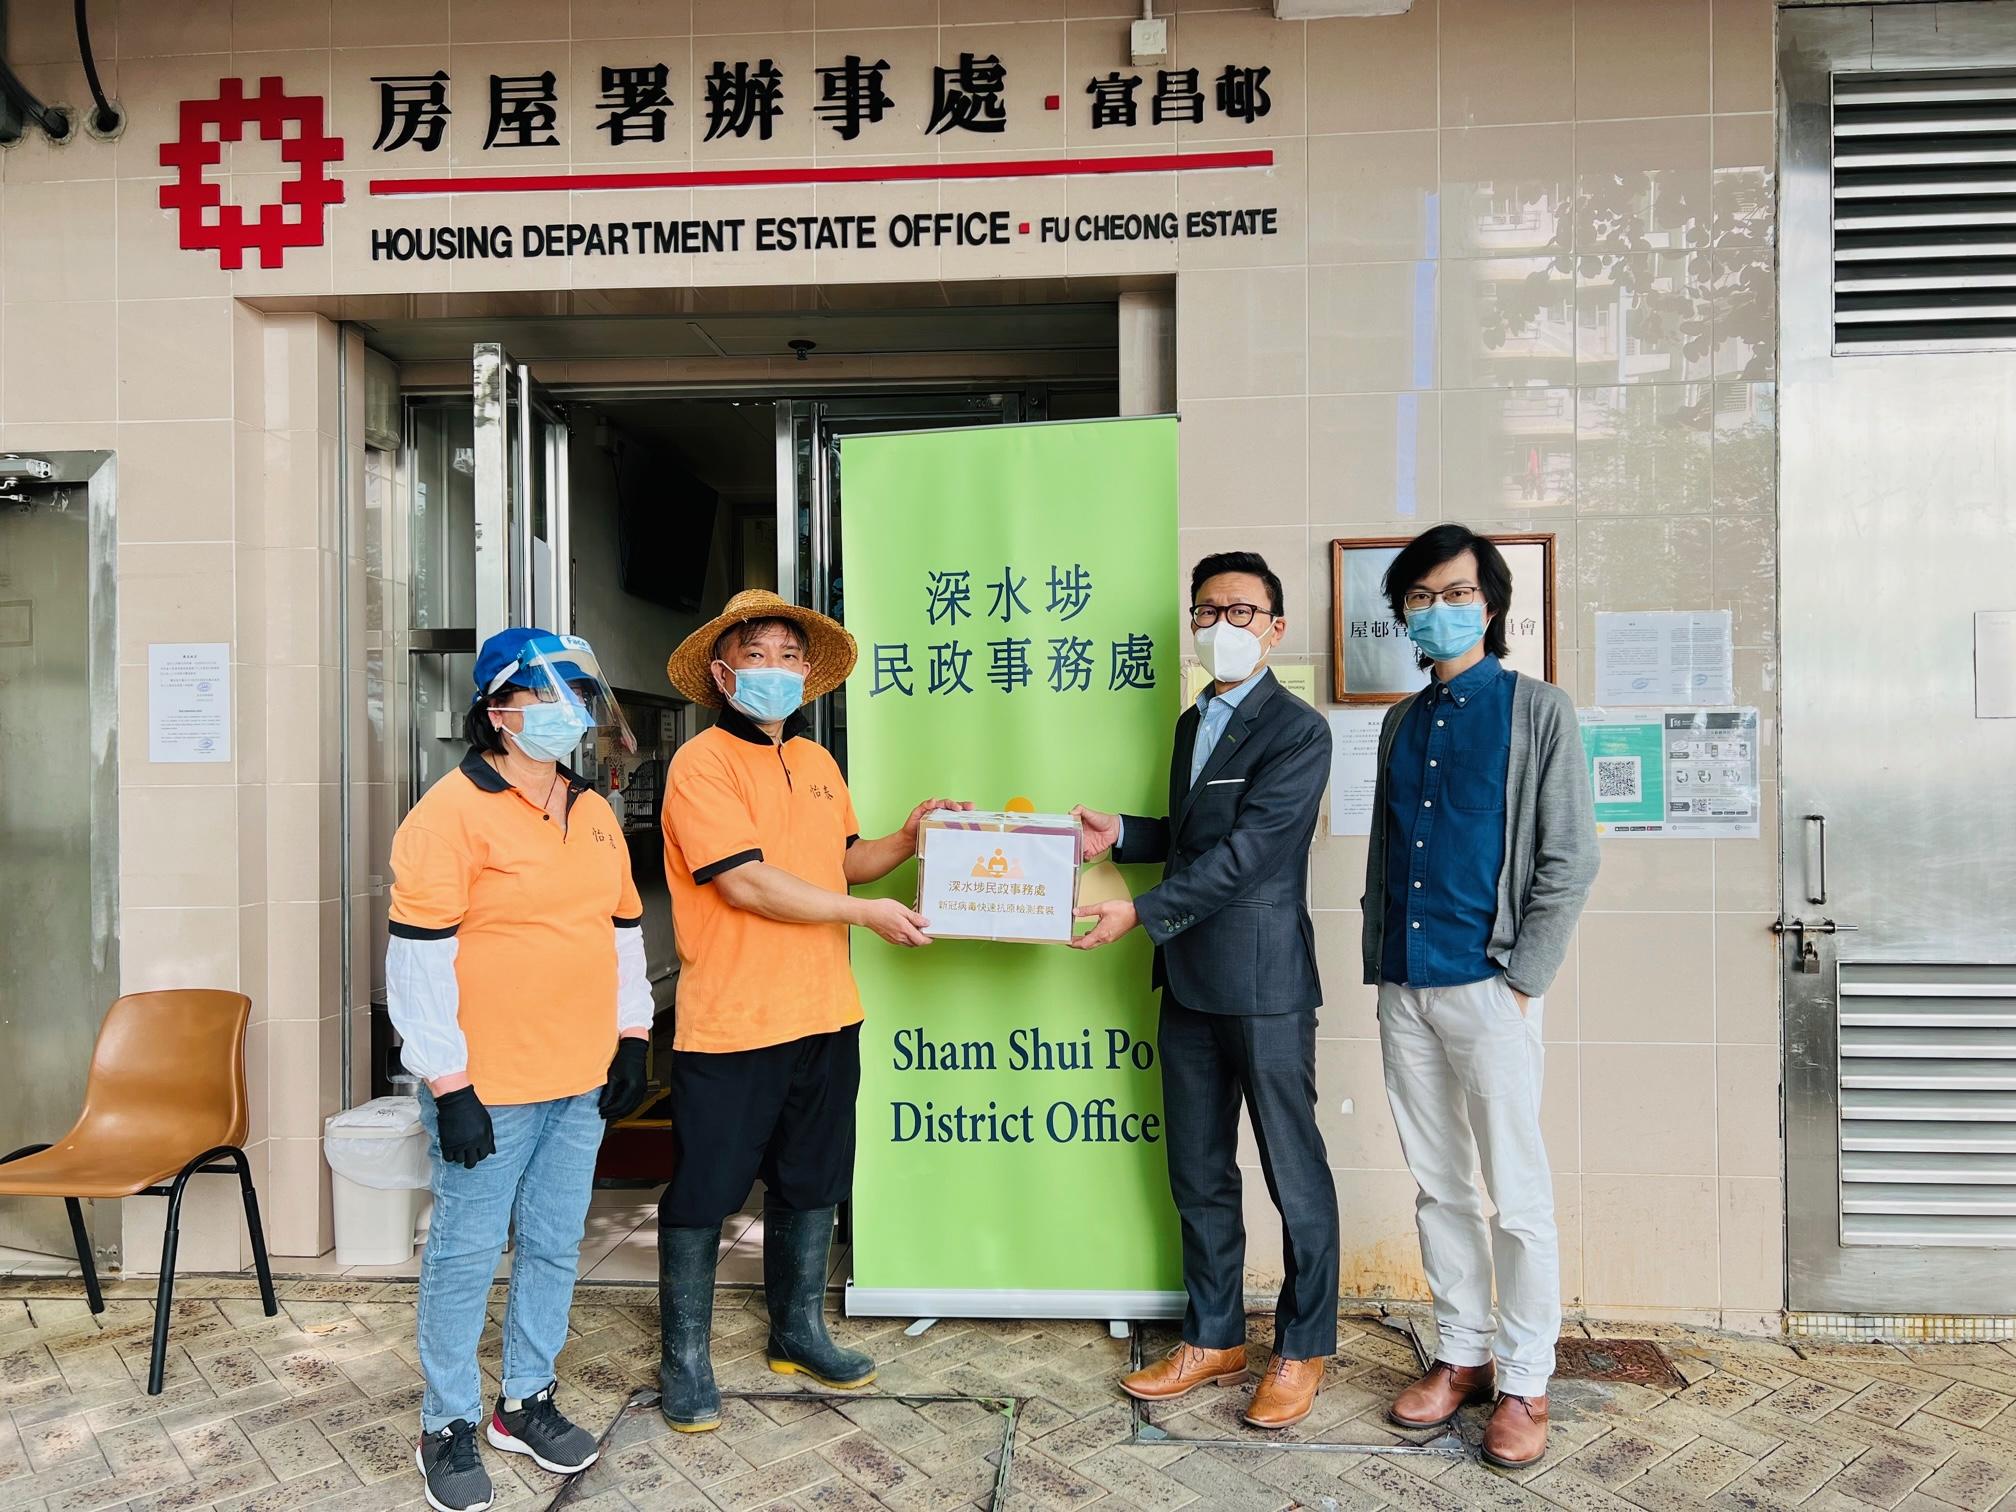 The Sham Shui Po District Office today (March 9) distributed COVID-19 rapid test kits to households, cleansing workers and property management staff living and working in Fu Cheong Estate for voluntary testing through the Housing Department and the property management company.